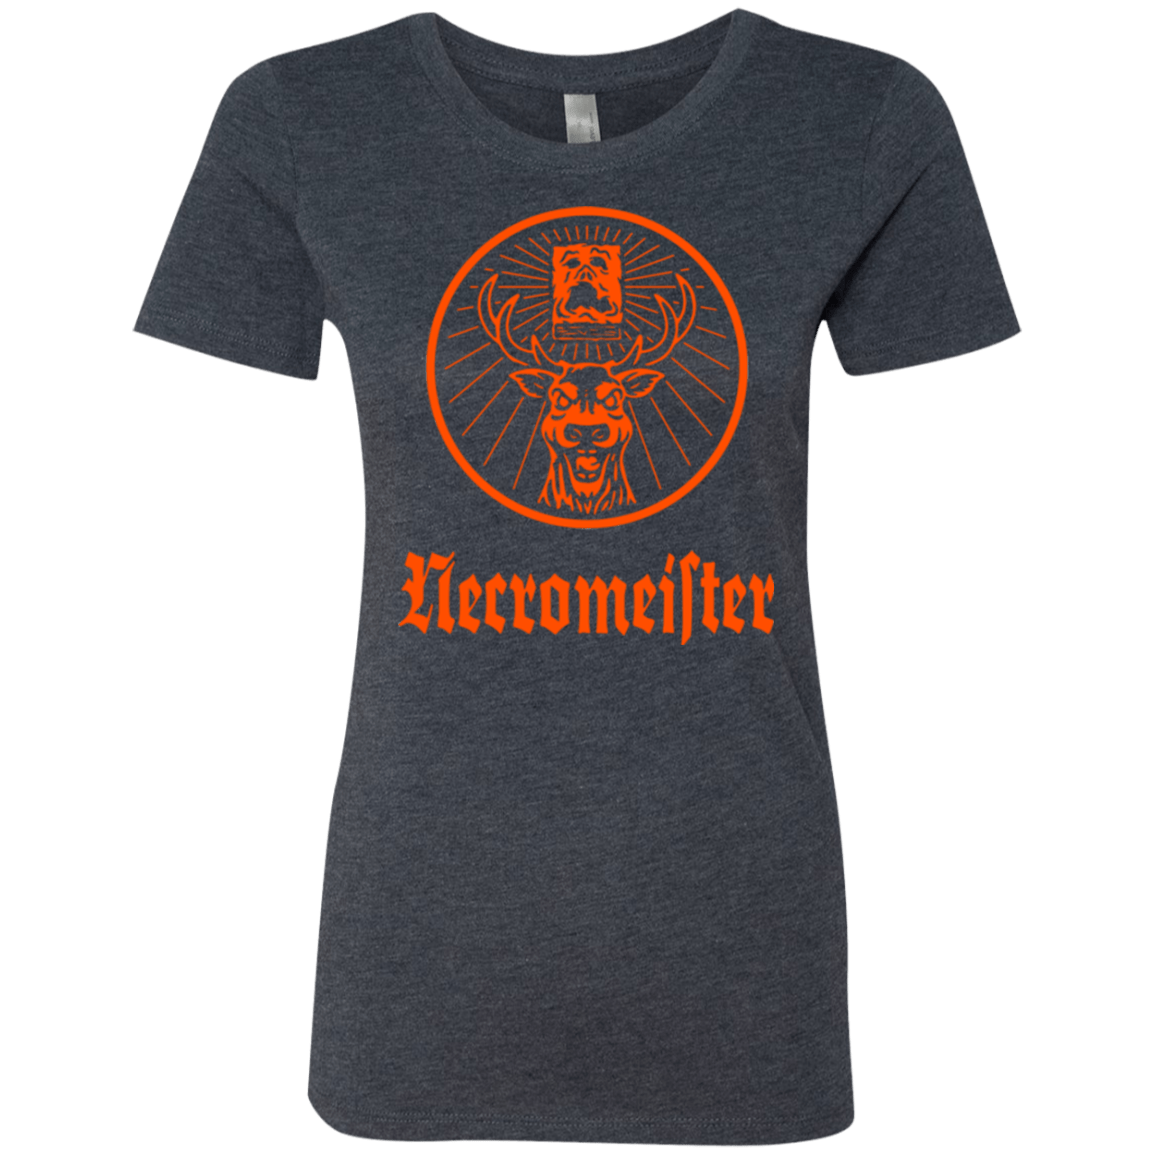 T-Shirts Vintage Navy / Small NECROMEISTER Women's Triblend T-Shirt